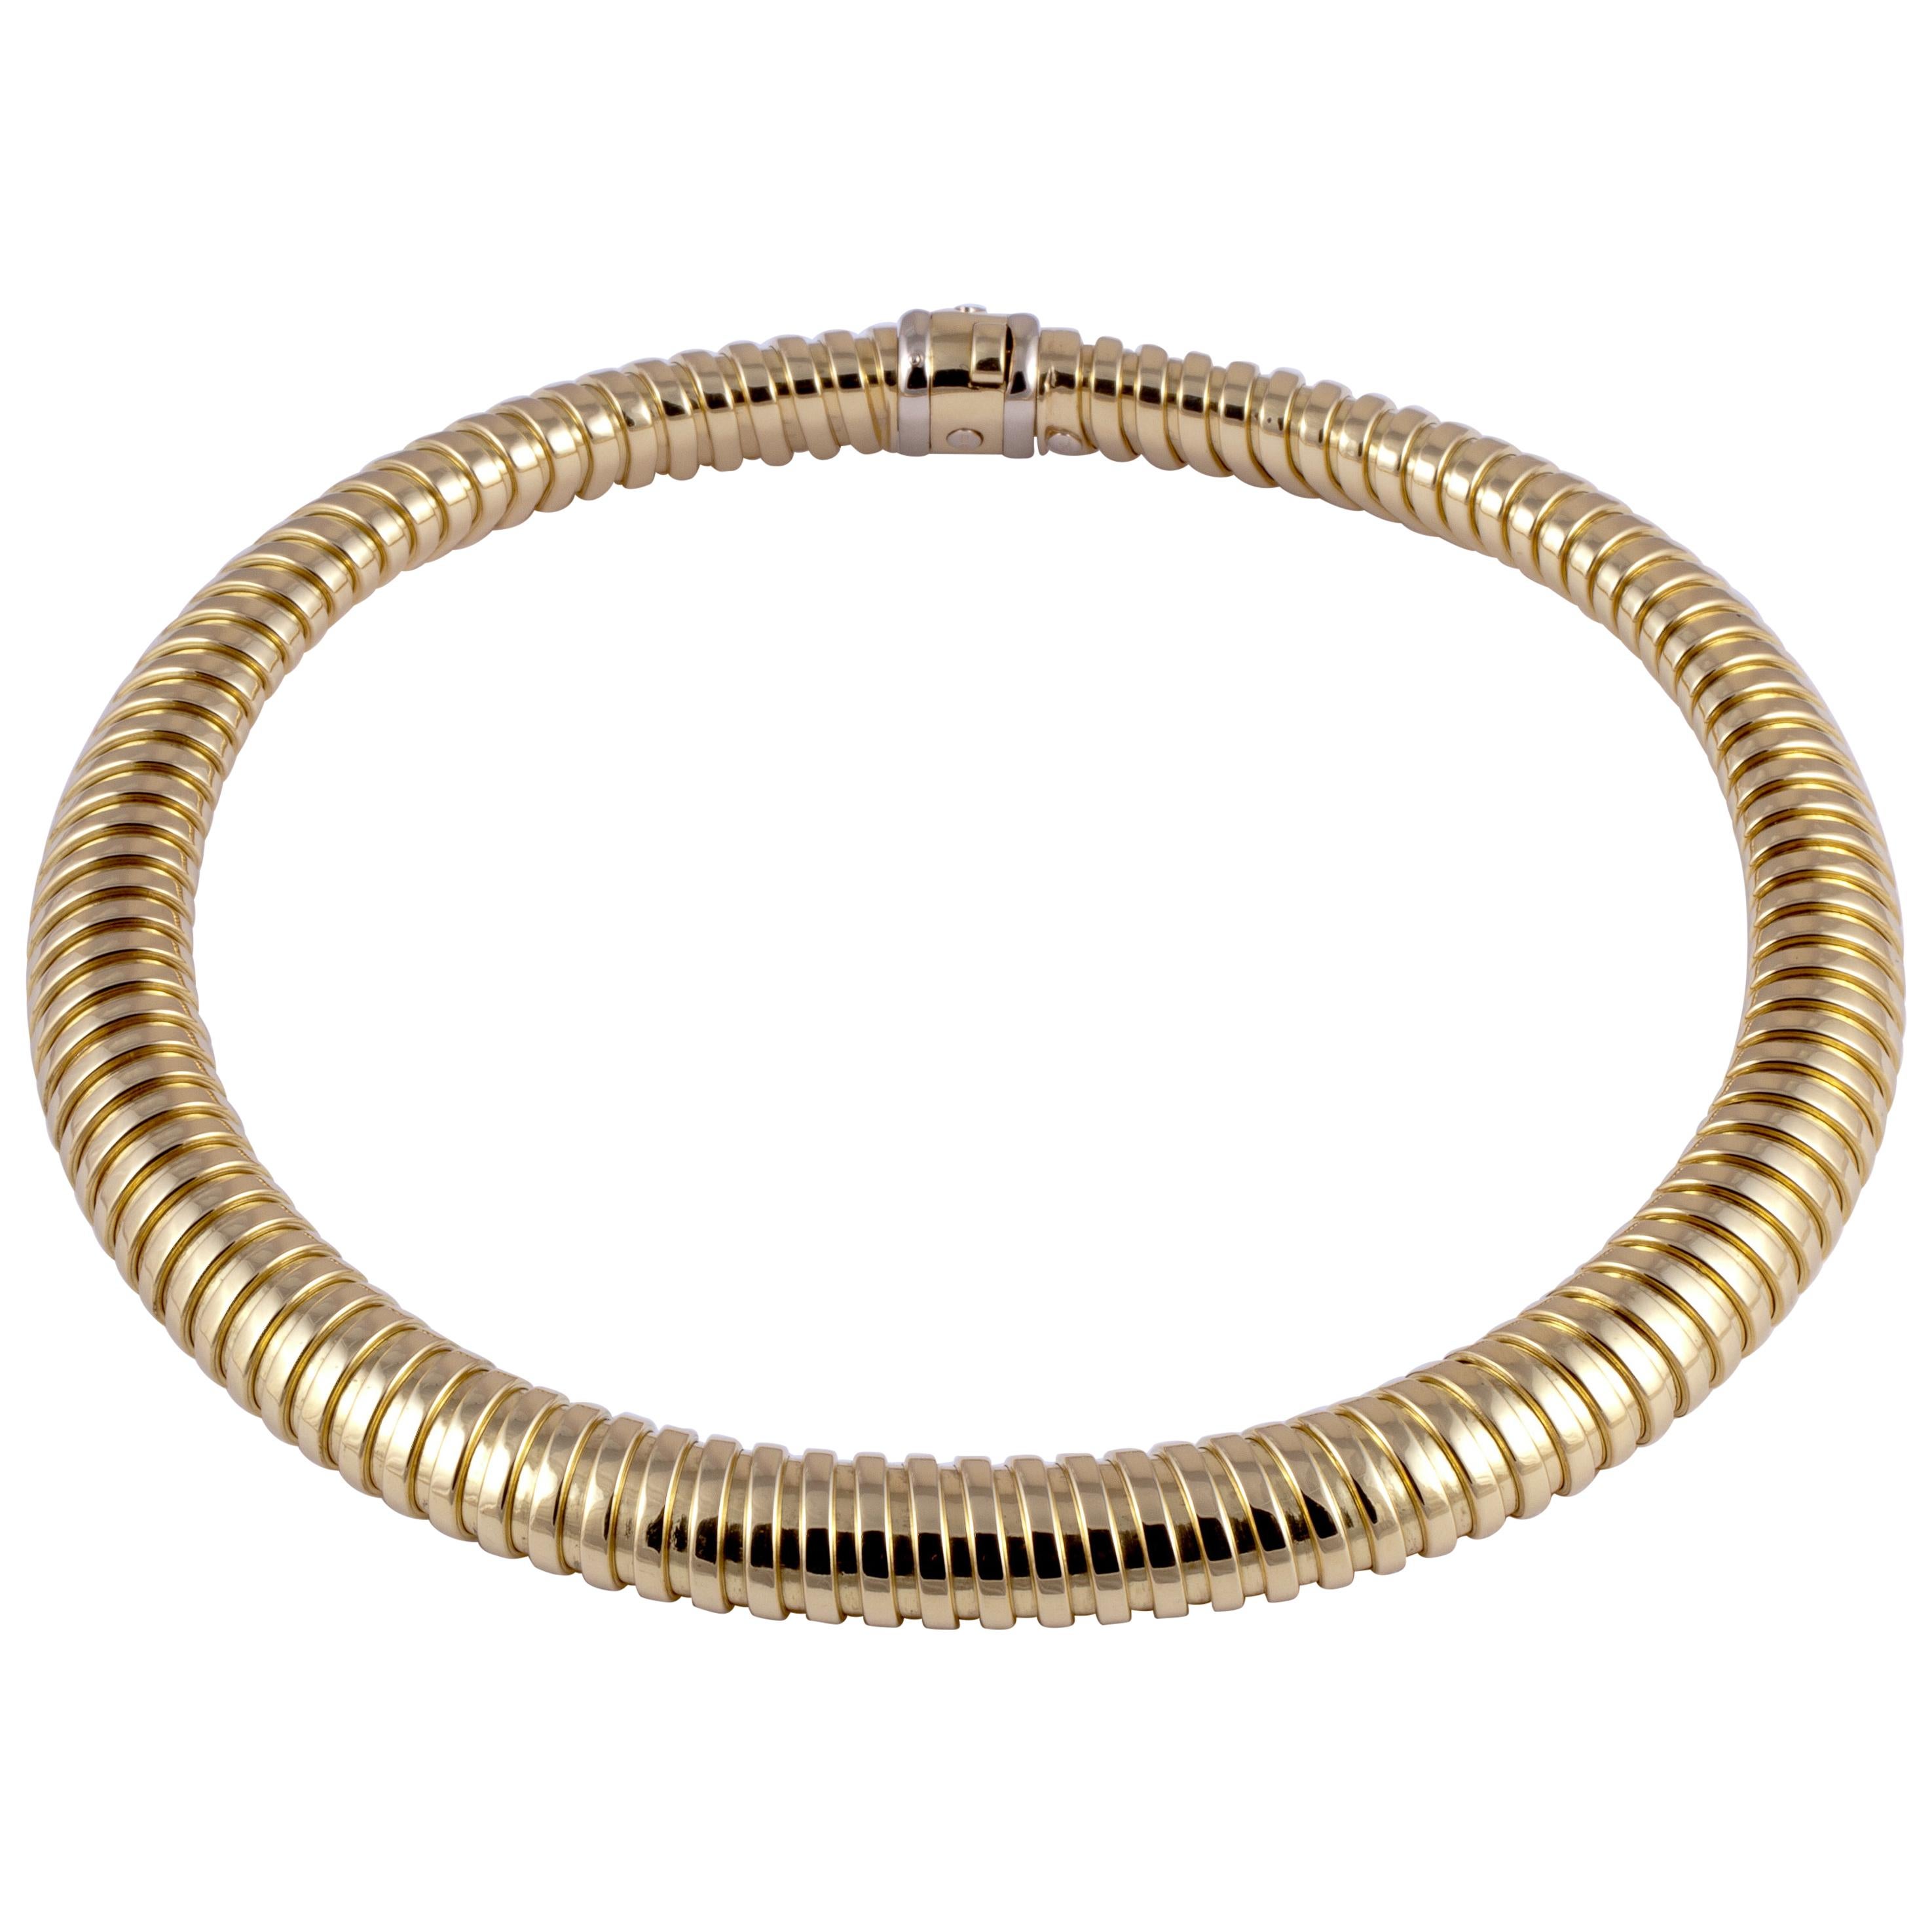 Bersoni Tubogas Necklace in 18K Gold For Sale